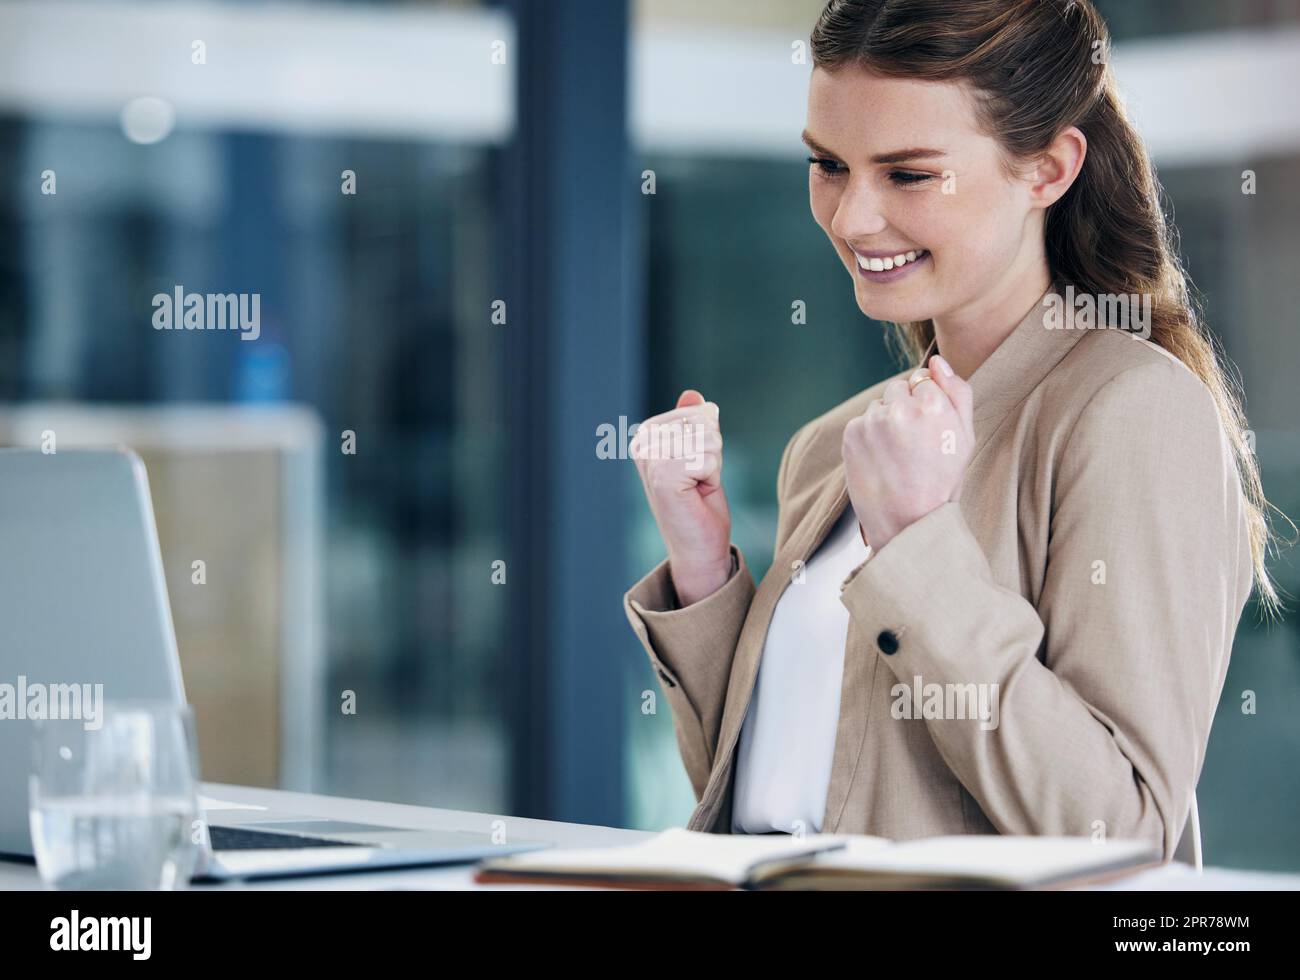 The offer Ive been wanting just came through. Shot of a young businesswoman cheering while working on a laptop in an office. Stock Photo